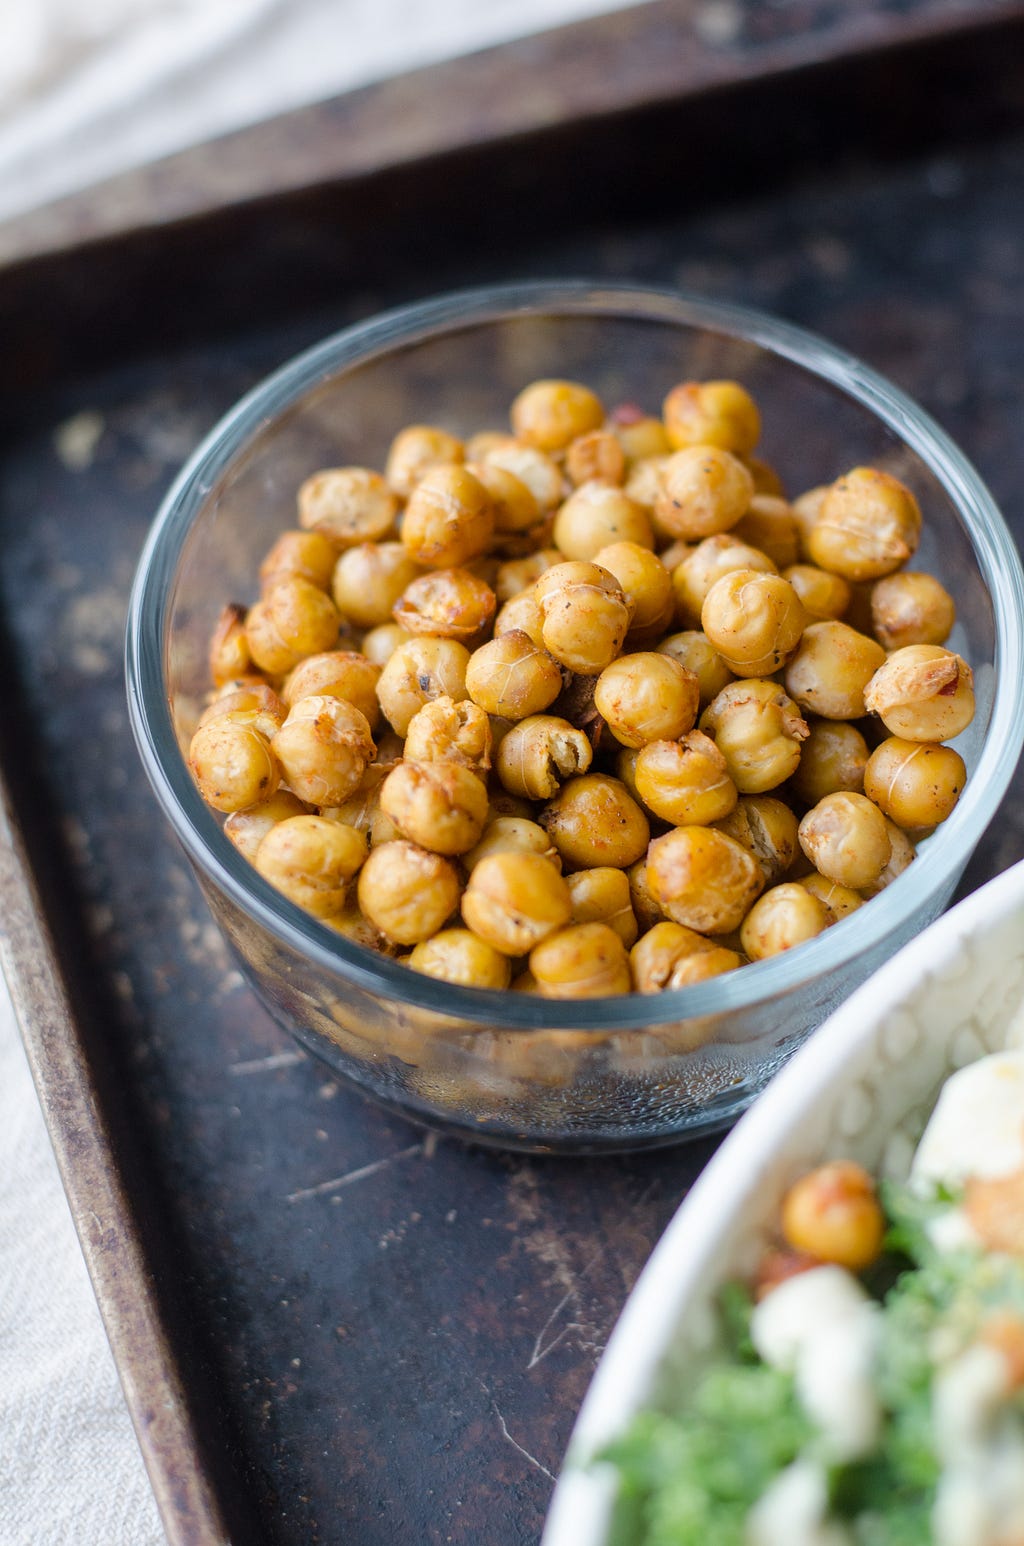 Chickpeas are a great vegan source of protein